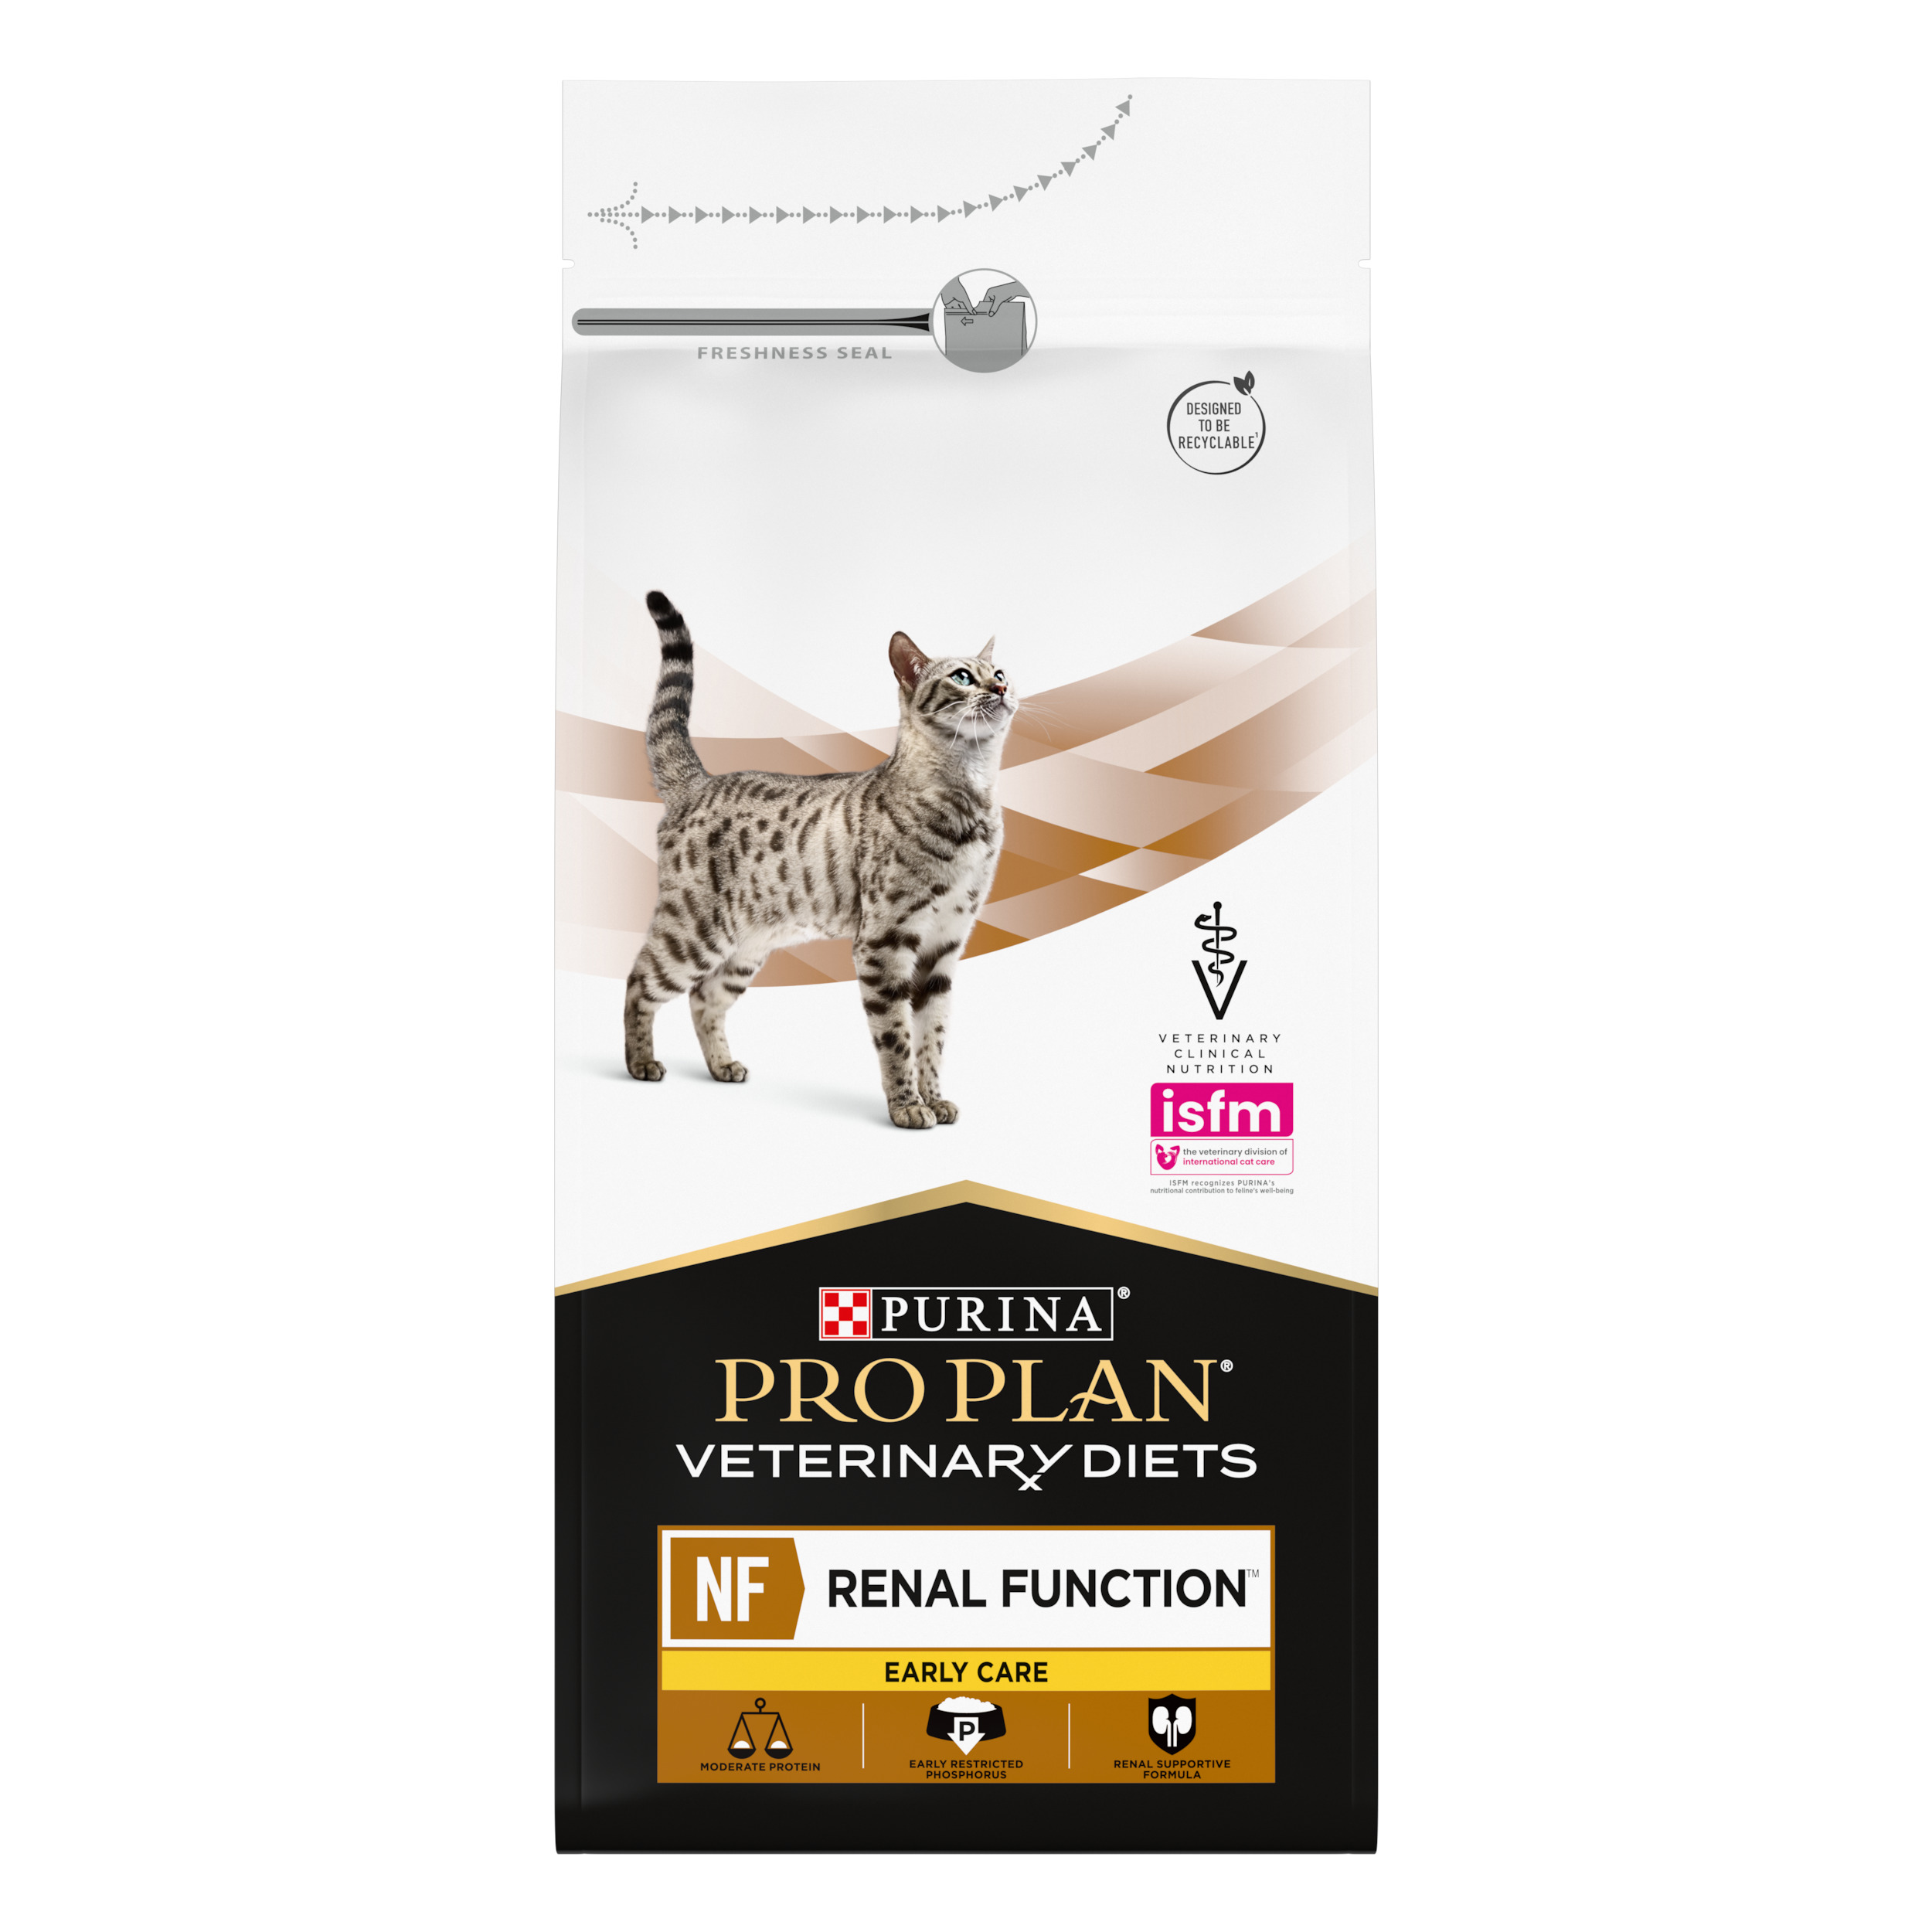 PRO PLAN® Veterinary Diets NF Renal Function Early care